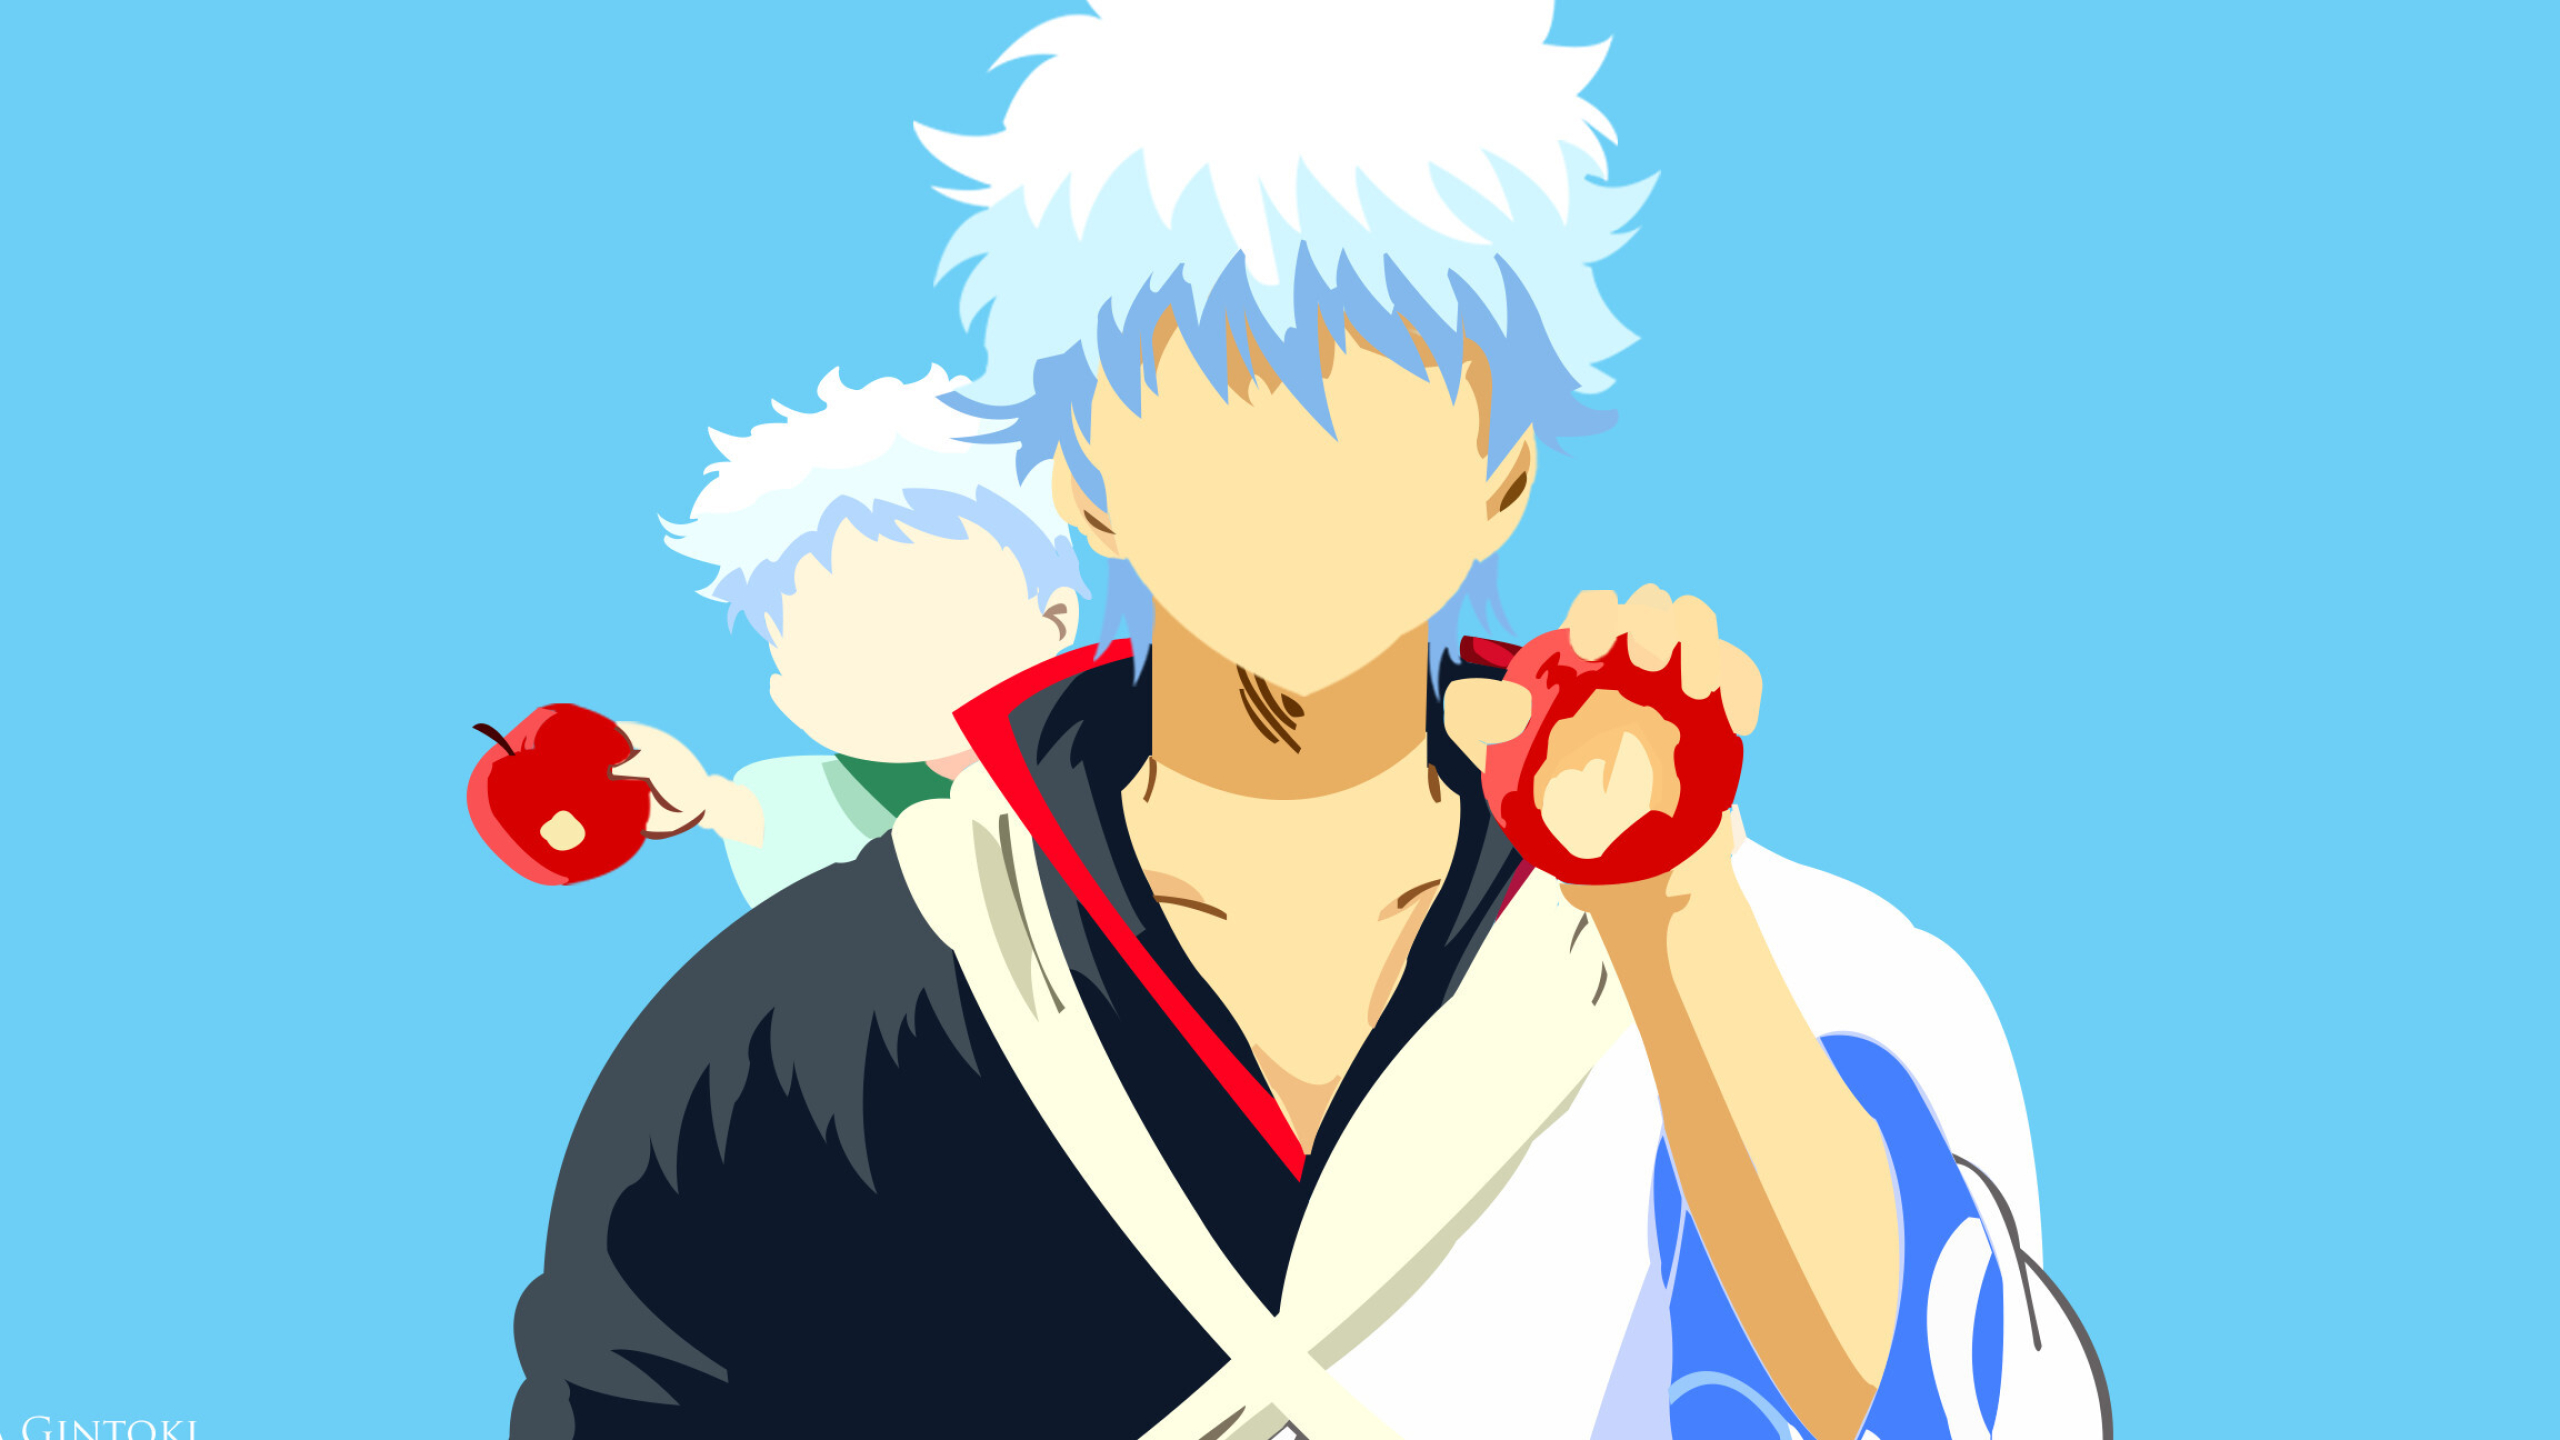 Gintoki Sakata: White demon, Capable of turning the tide of any battle, Called “The Ace” by Katsura and Takasugi. 2560x1440 HD Background.